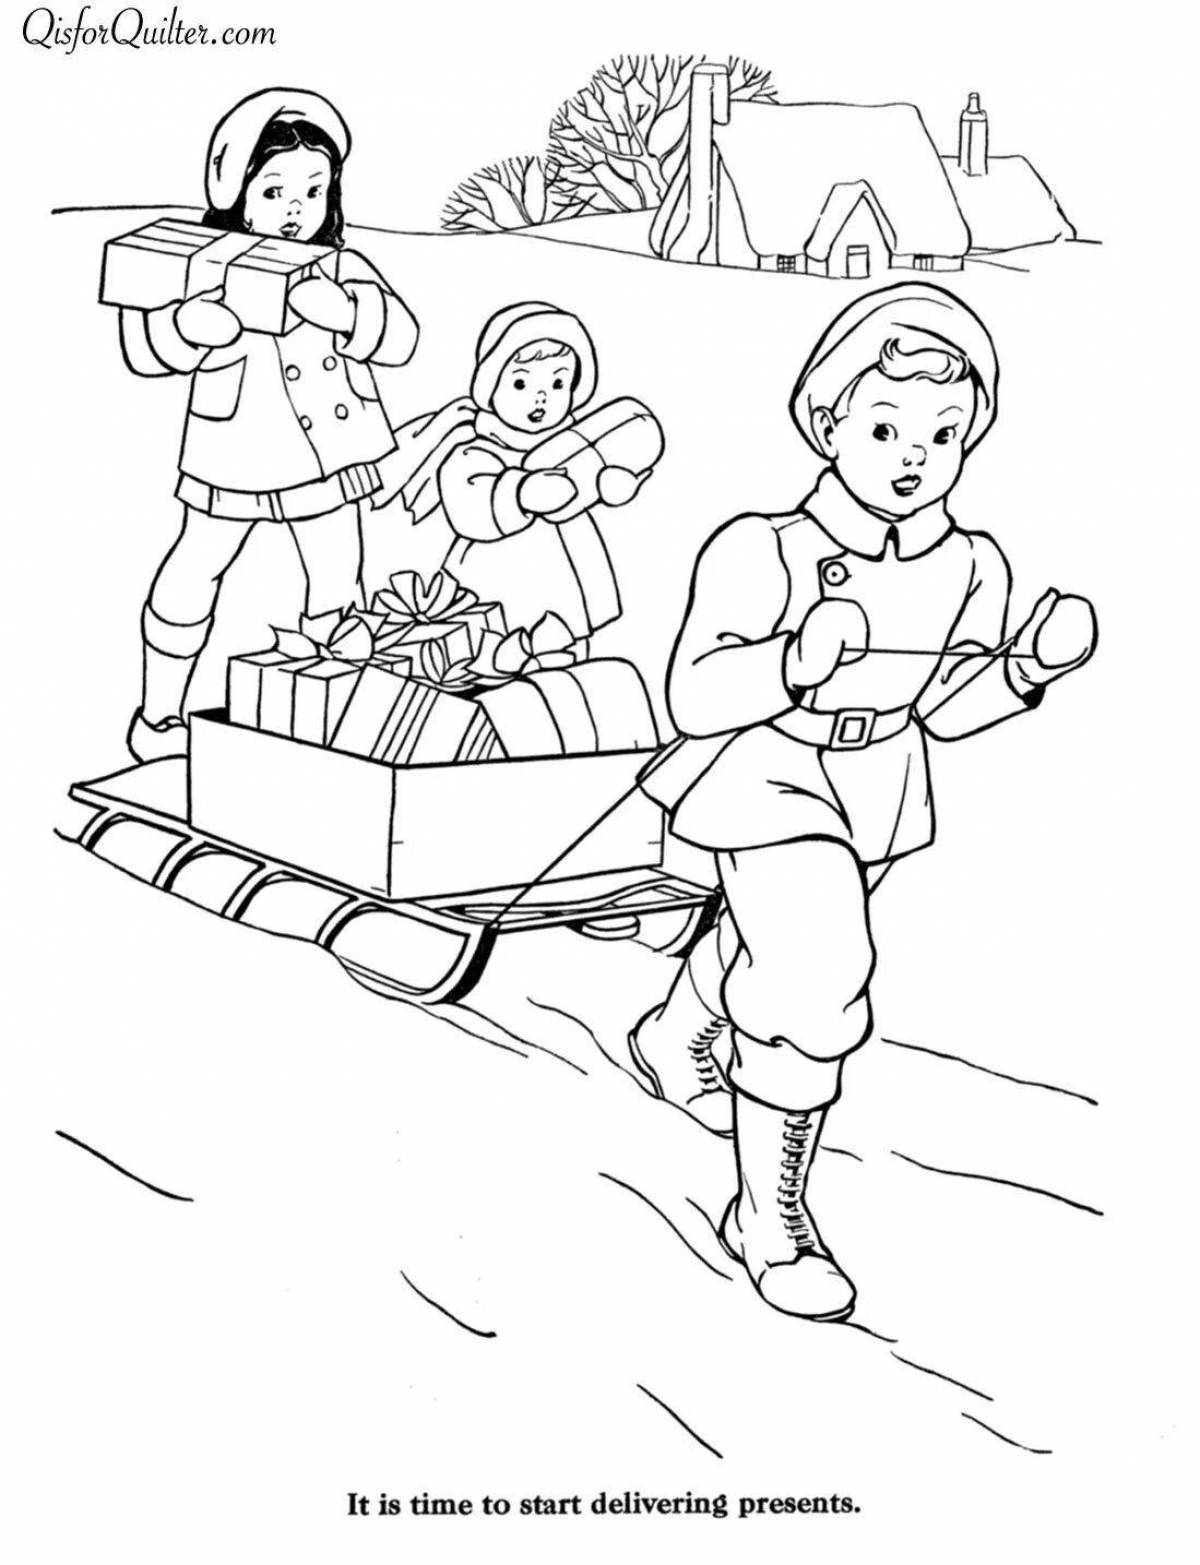 Colorful caroling coloring page